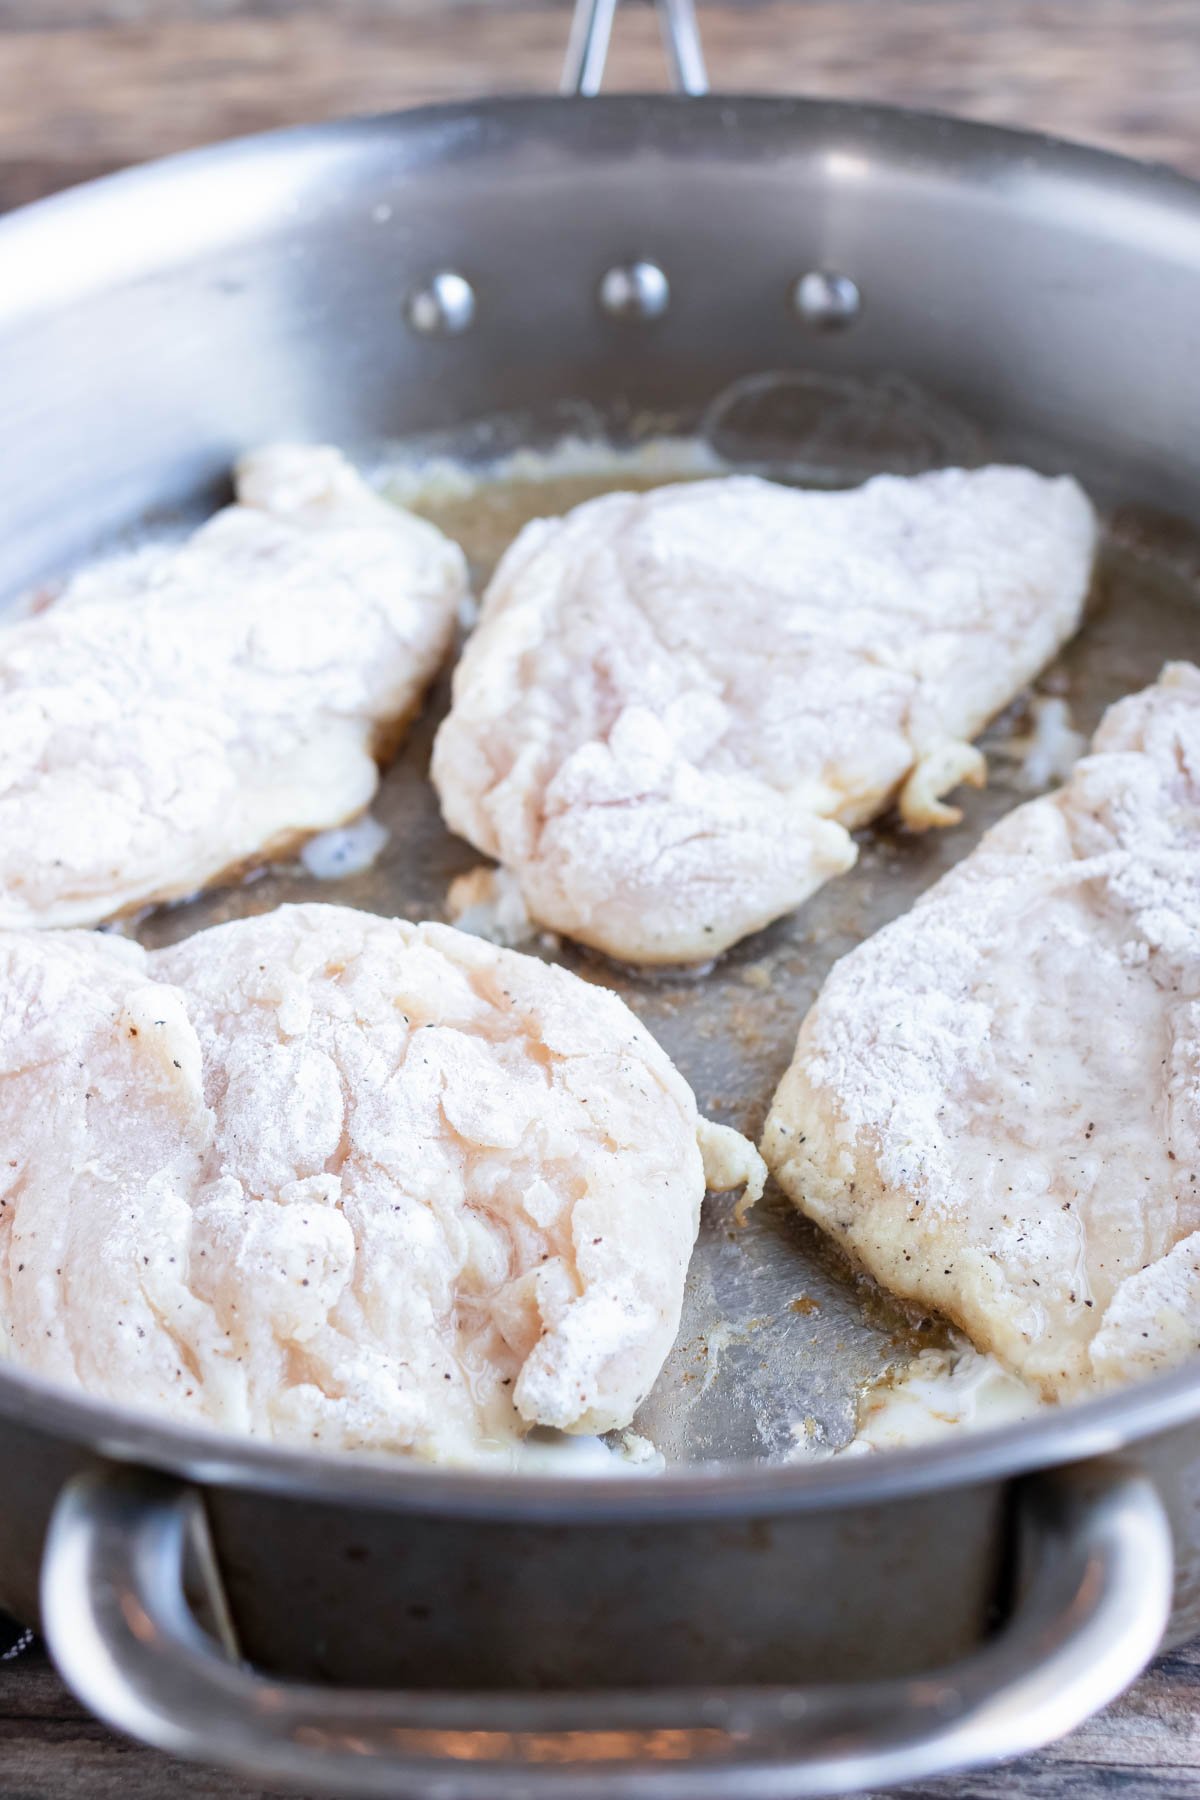 Dredged chicken breasts are added to the hot butter.